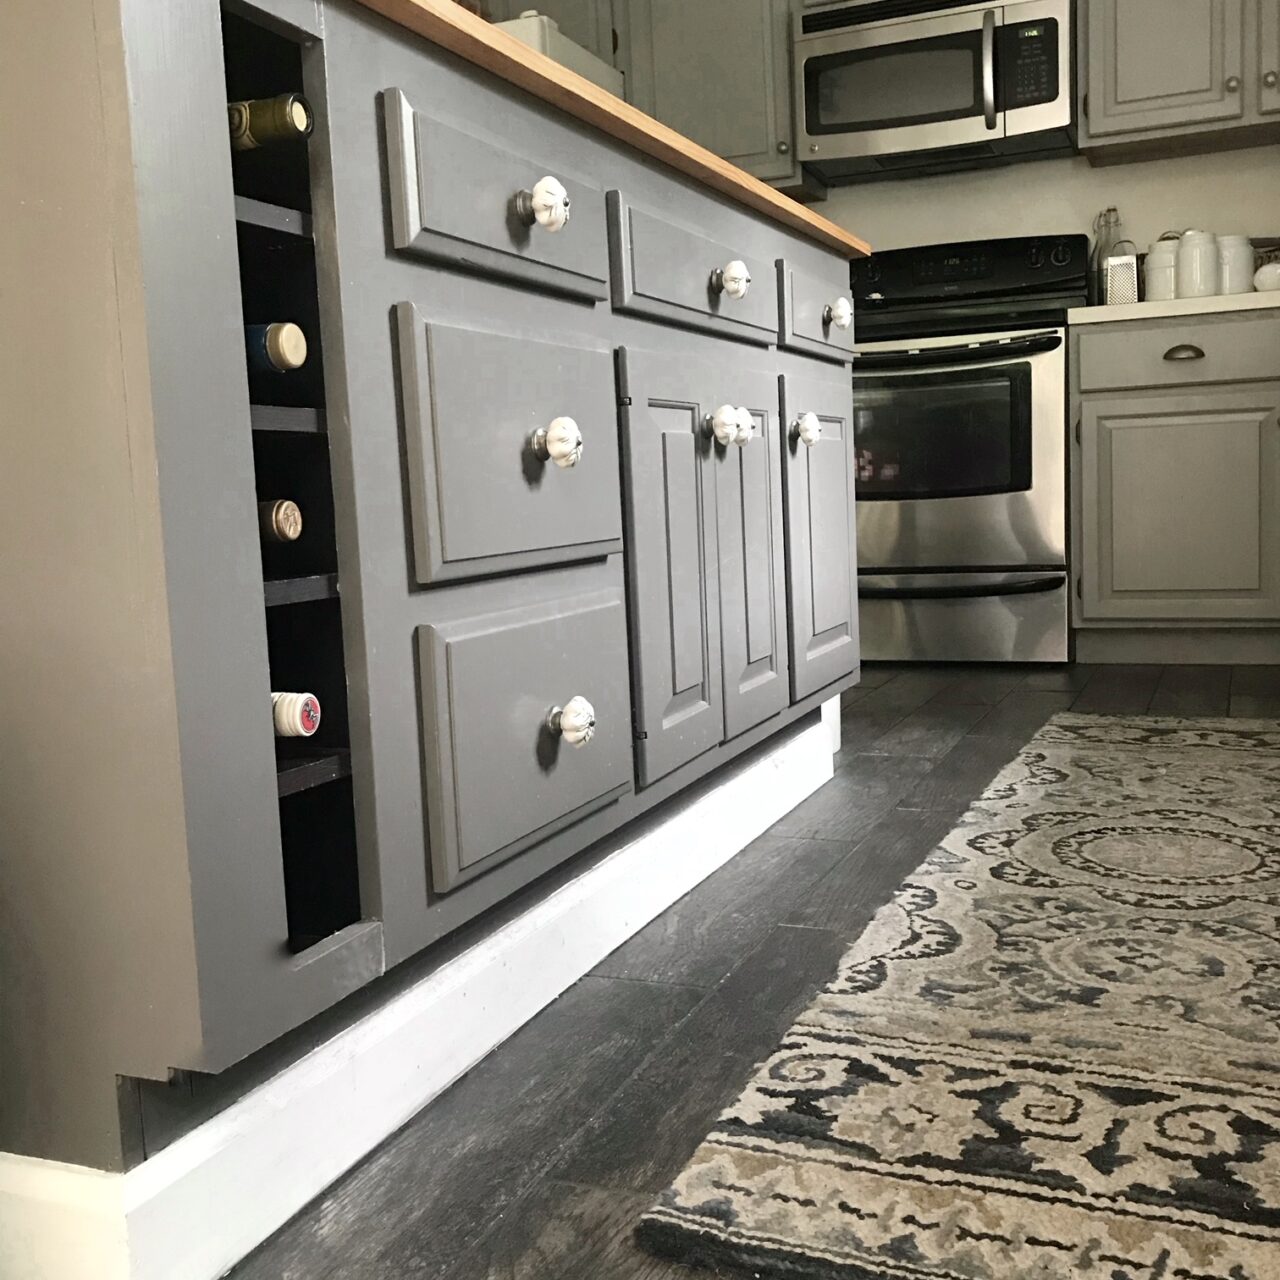 A Kitchen Island Made from Base Cabinets